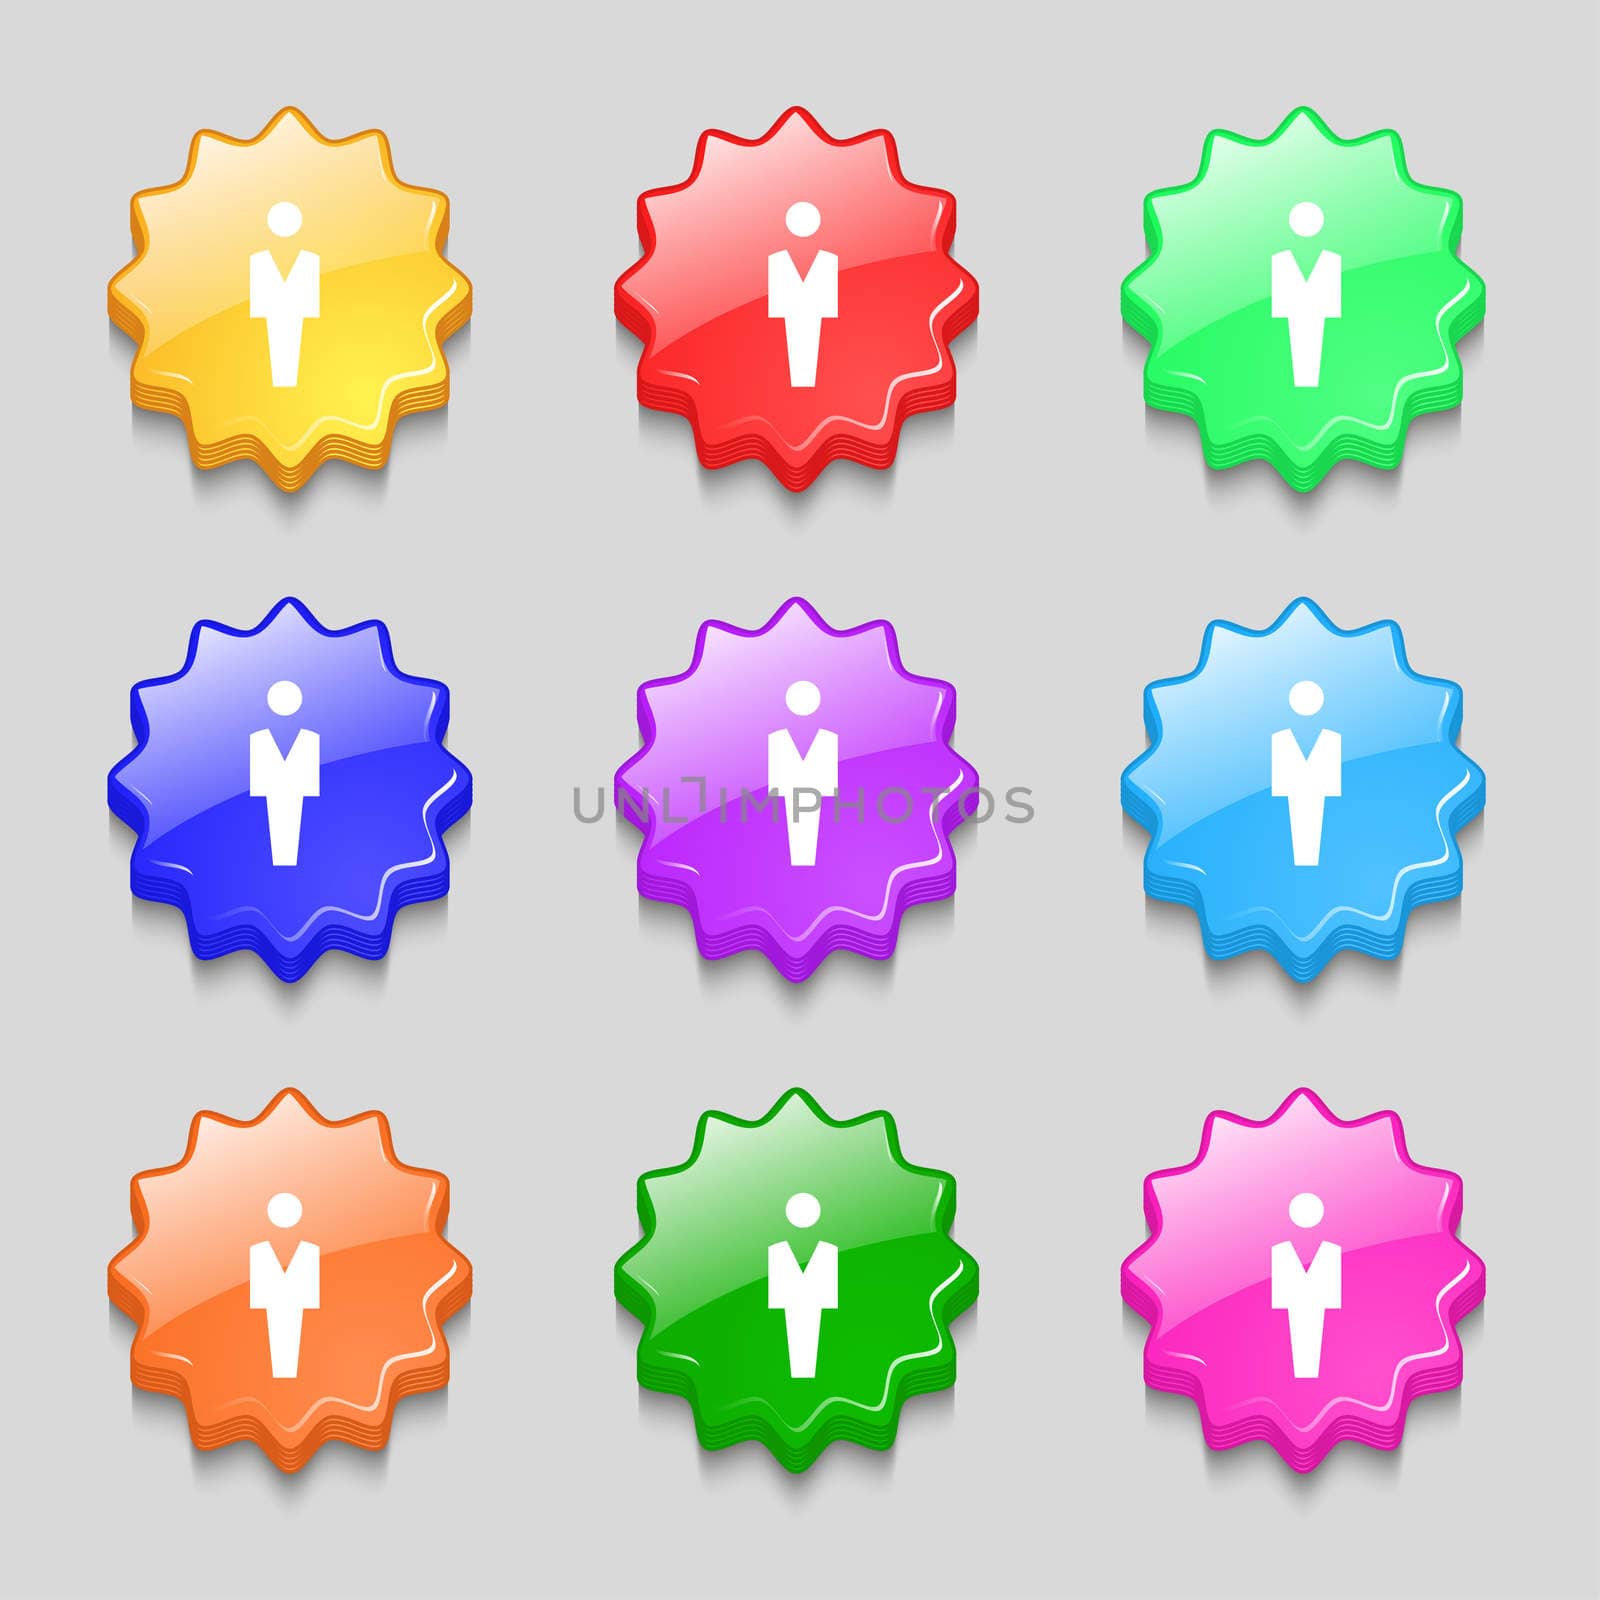 Human, Man Person, Male toilet icon sign. symbol on nine wavy colourful buttons. illustration